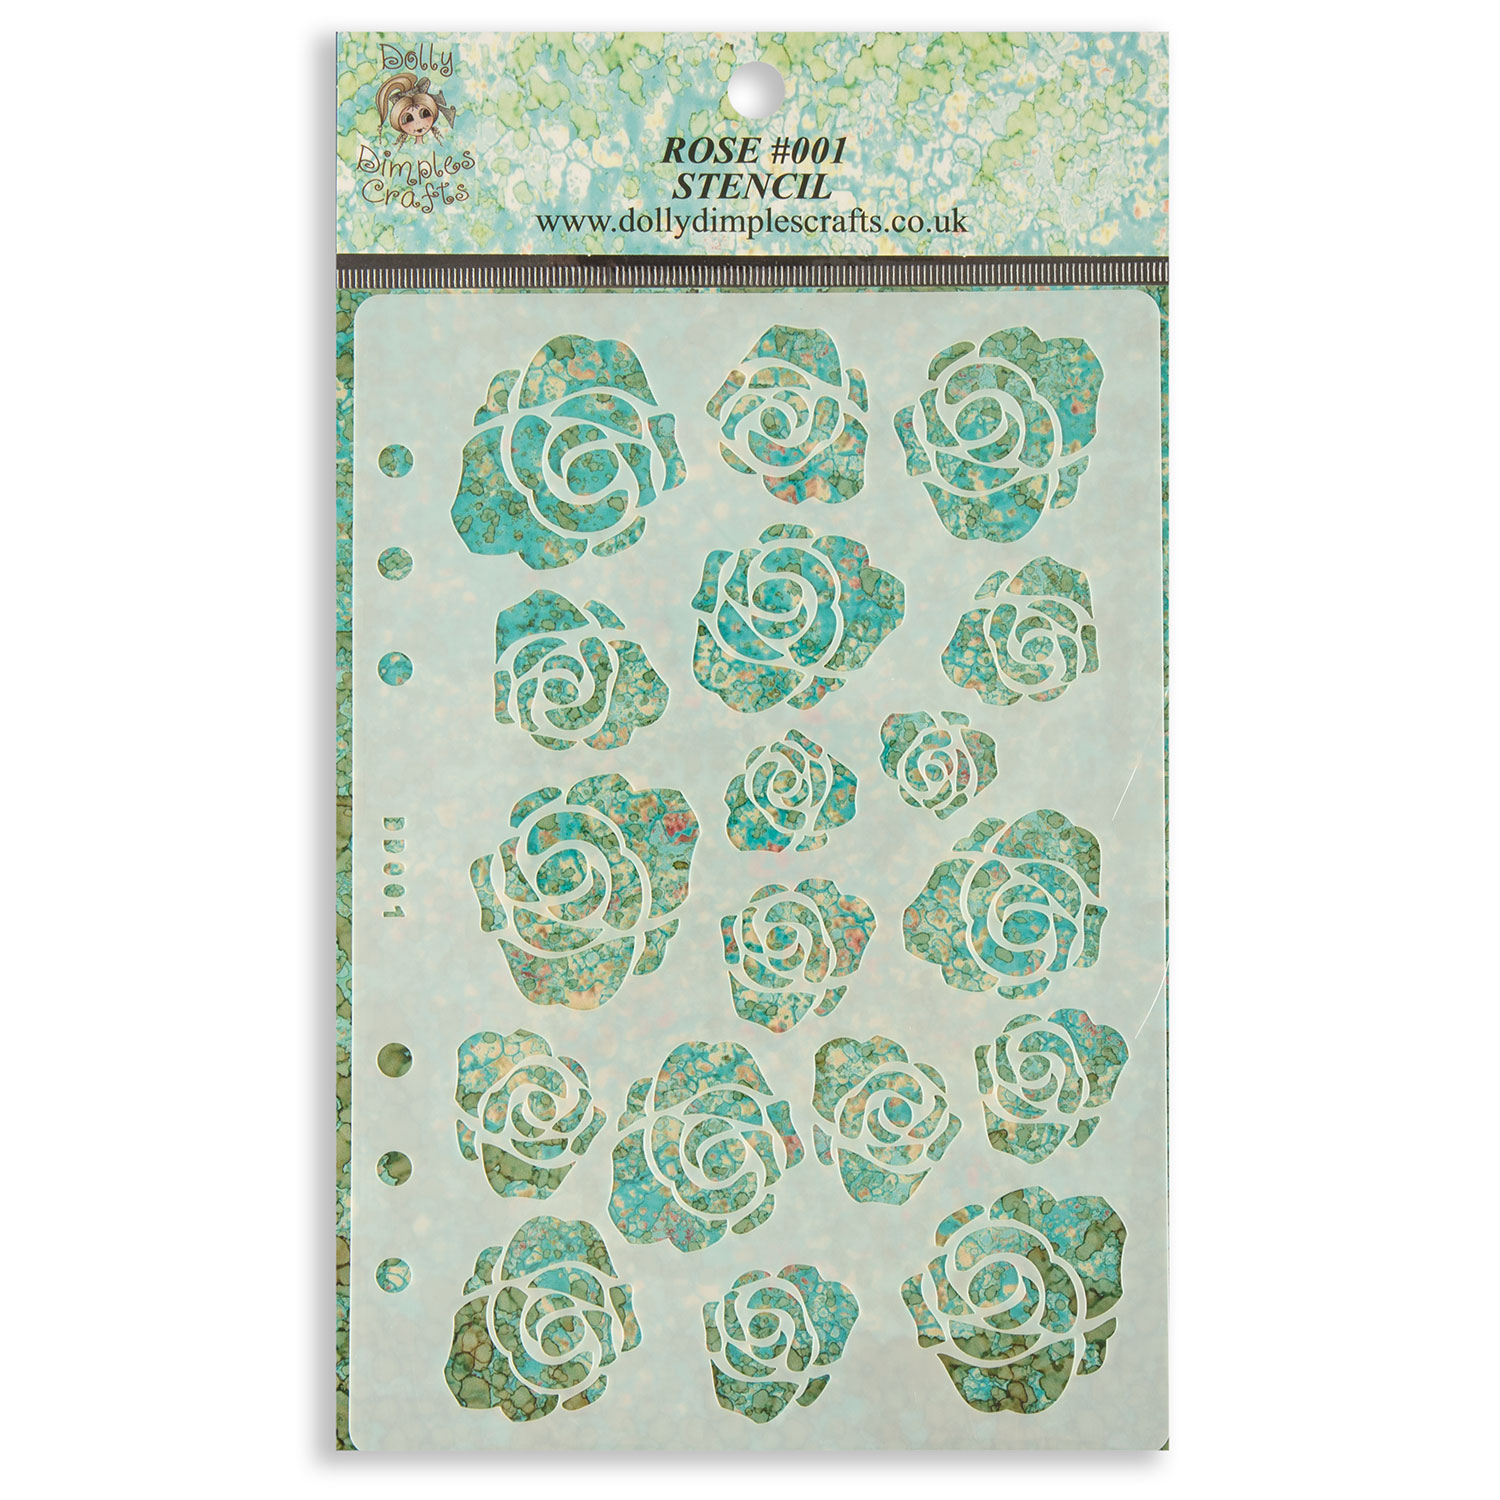 Dolly Dimples A5 Stencils Pick N Mix - Choose Any 2 - #001 Roses